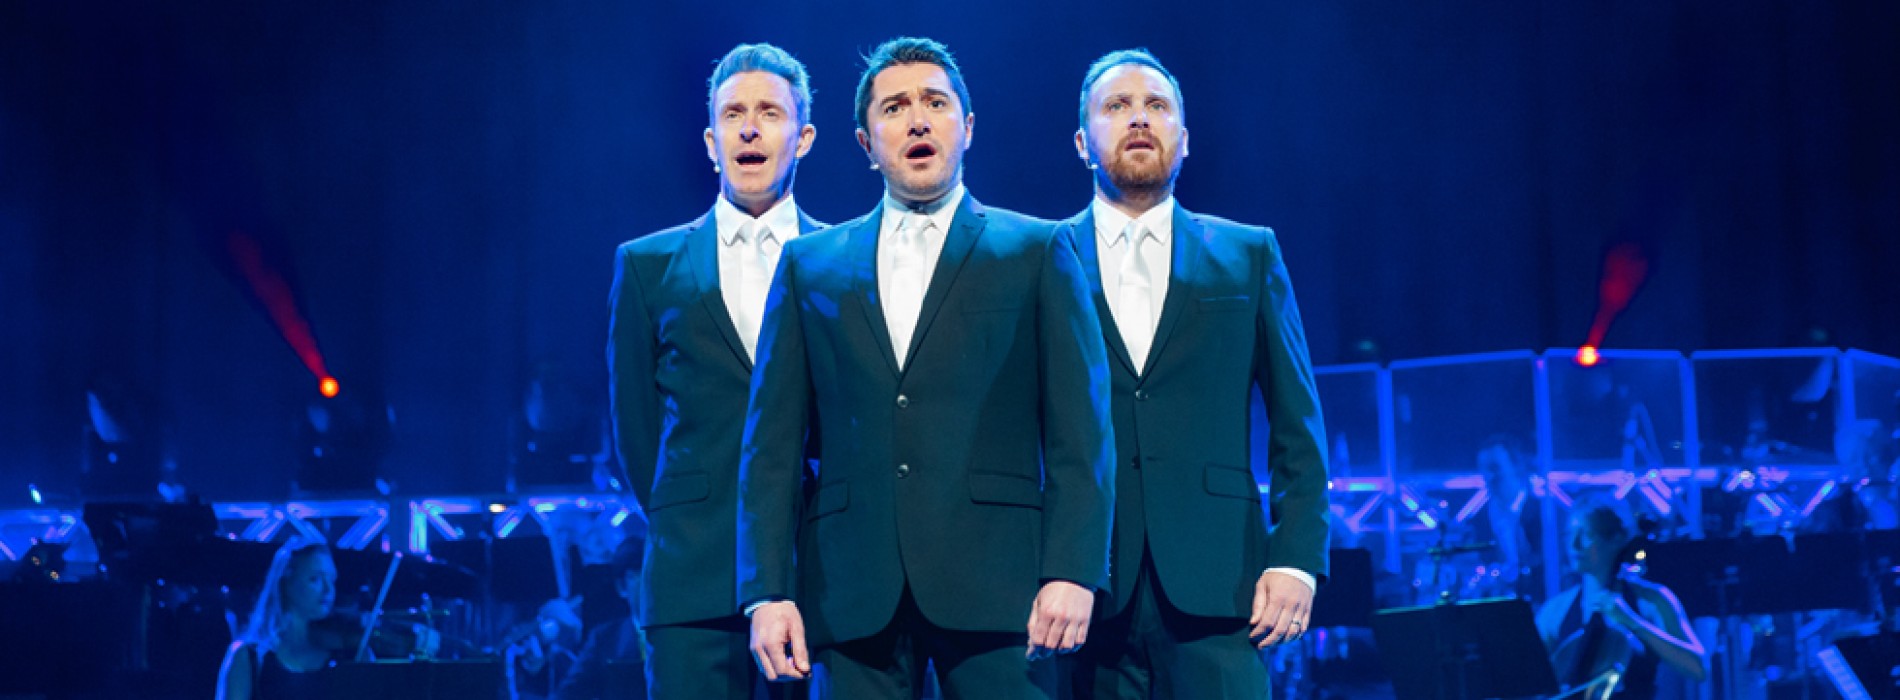 Three Phantoms to Bring the Best of Broadway and The West End to The Parisian Macao